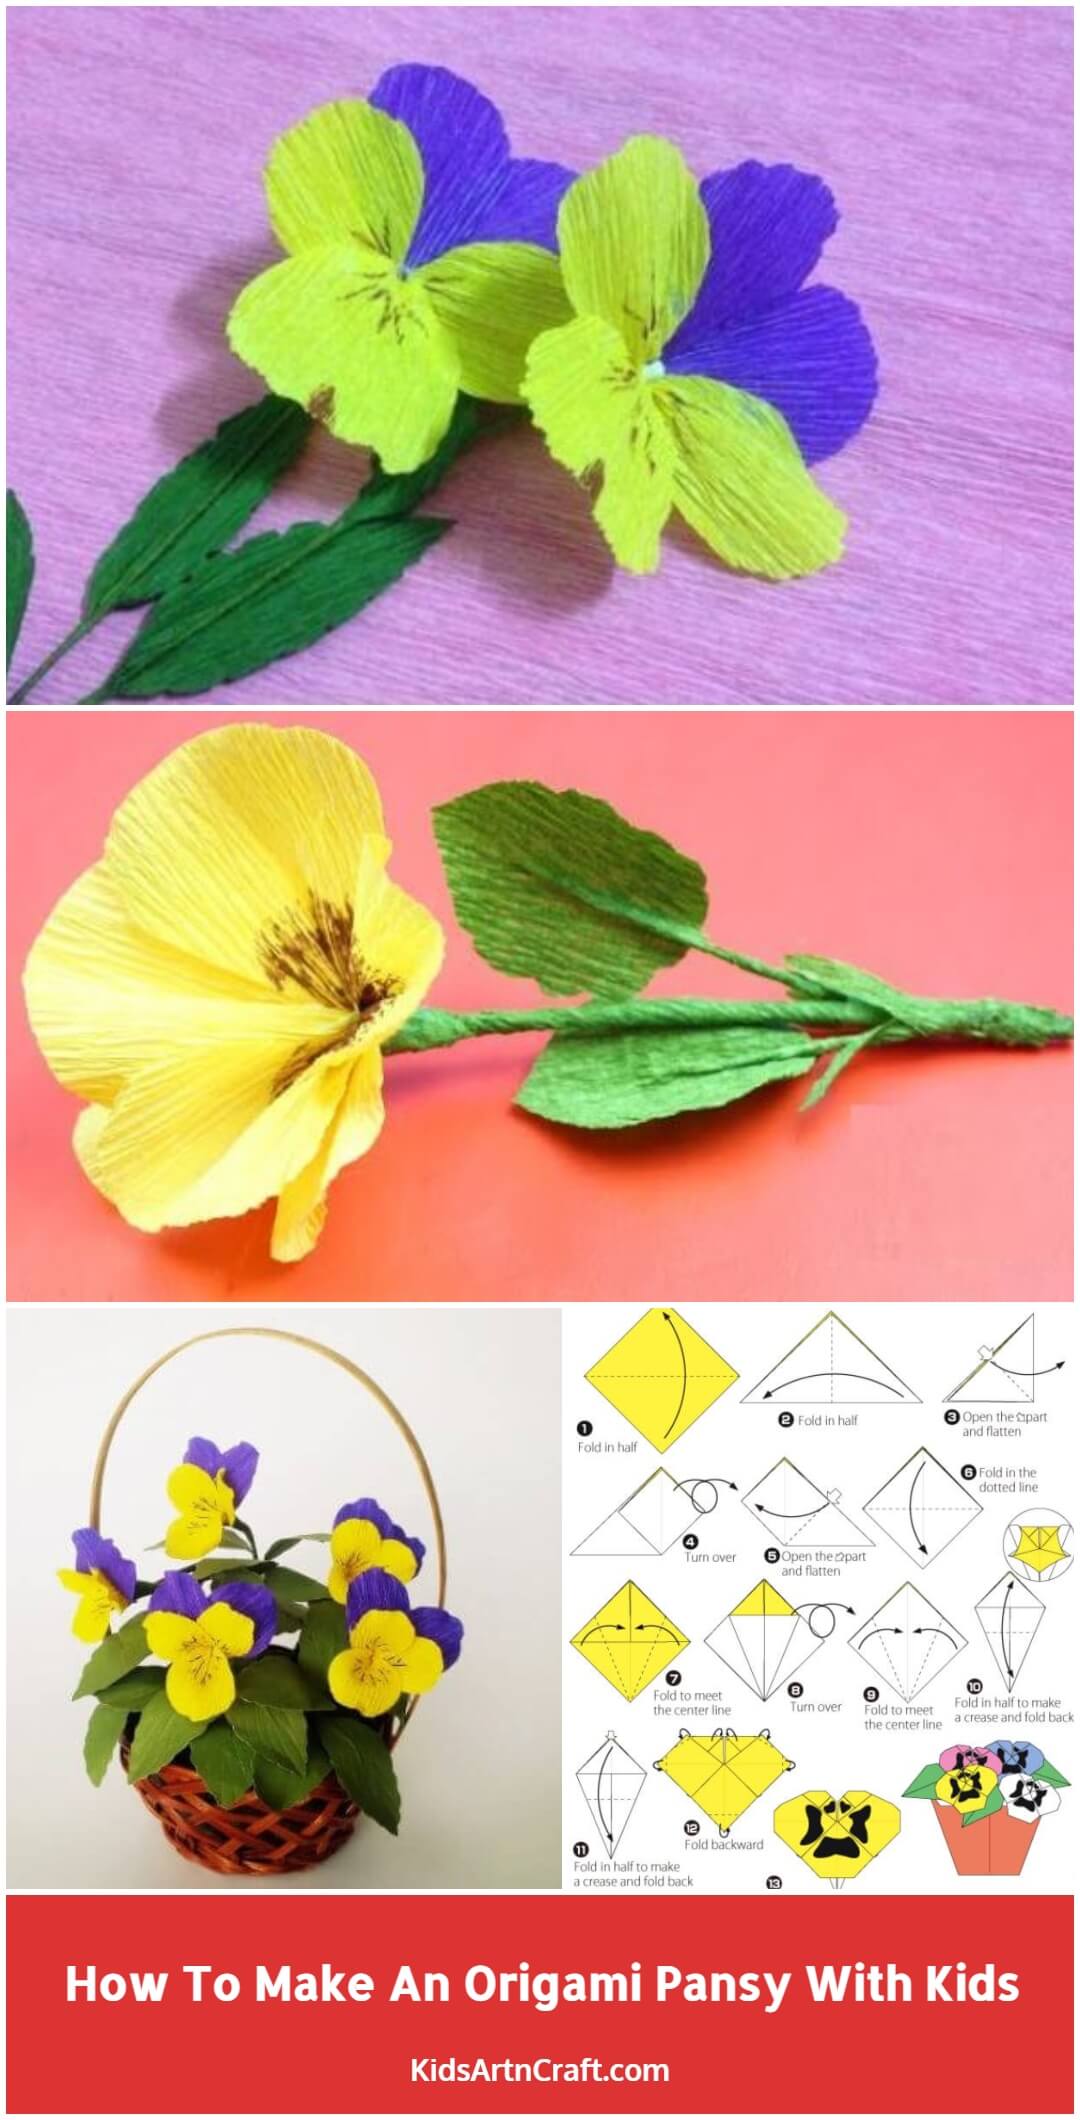 How To Make An Origami Pansy With Kids